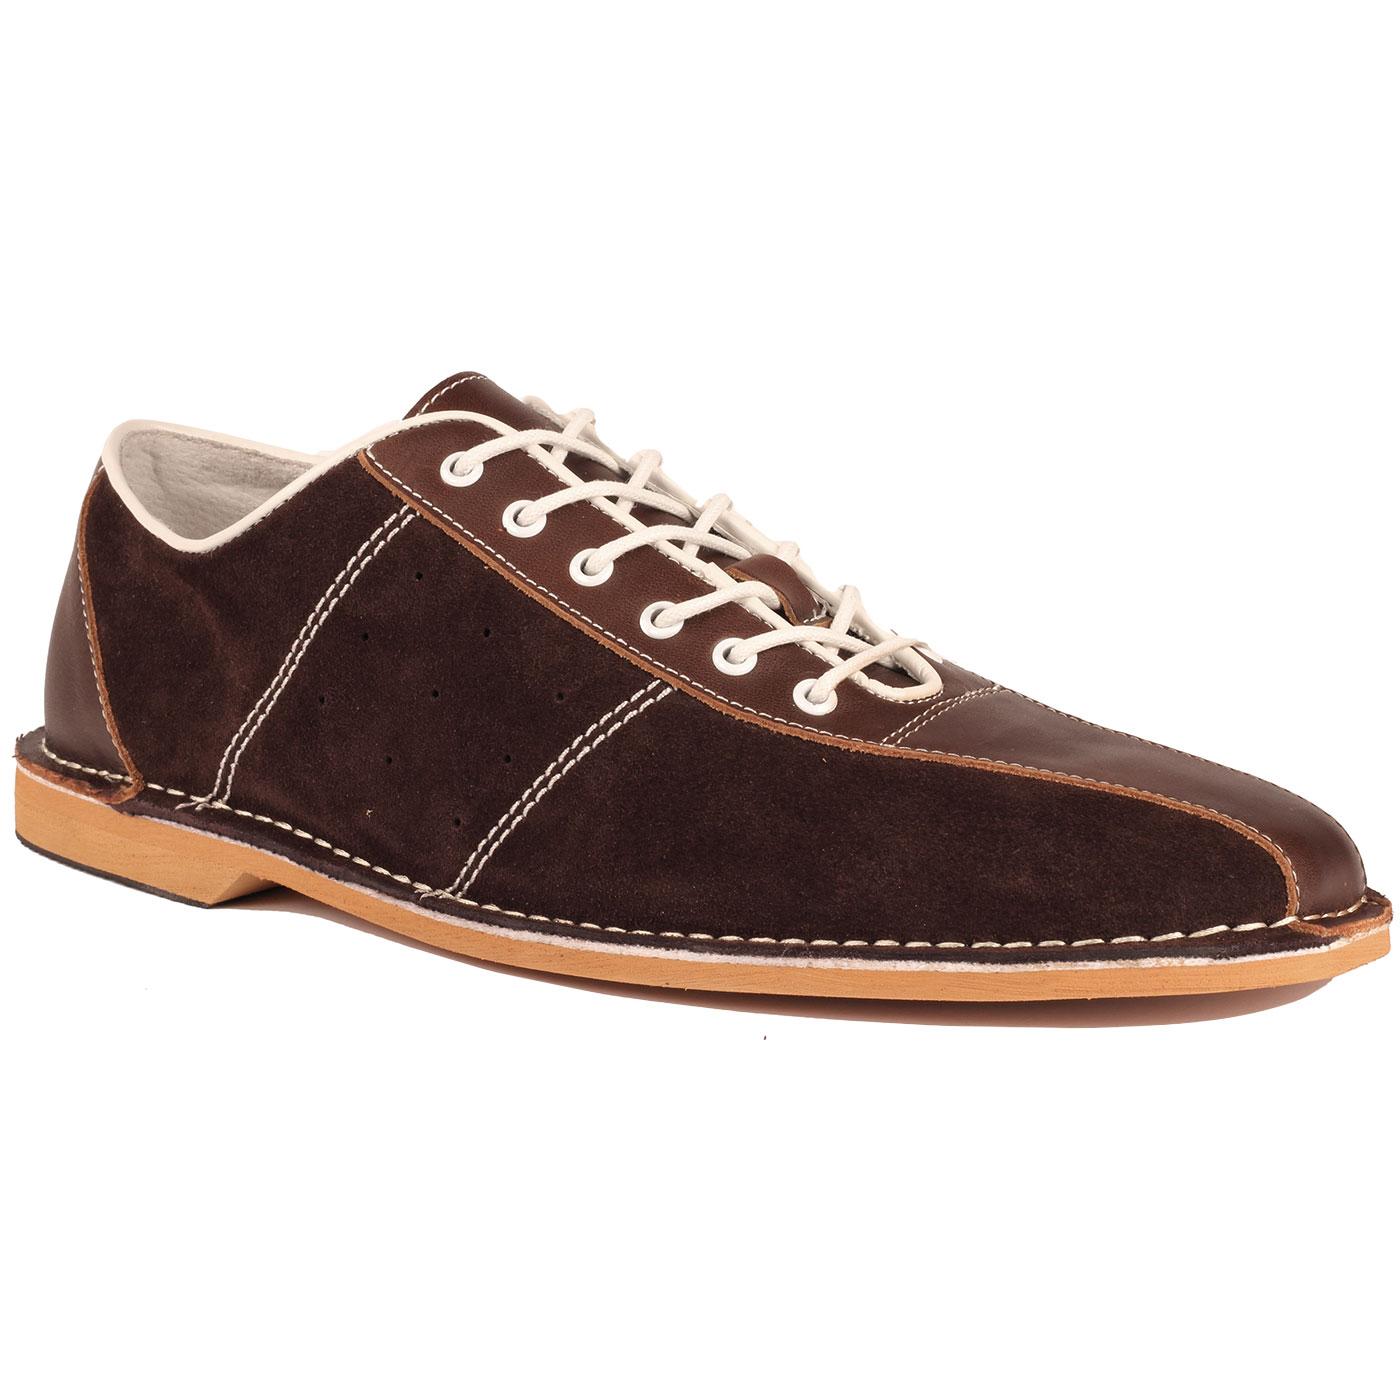 All Up MADCAP ENGLAND Mod Bowling Shoes (Brown)